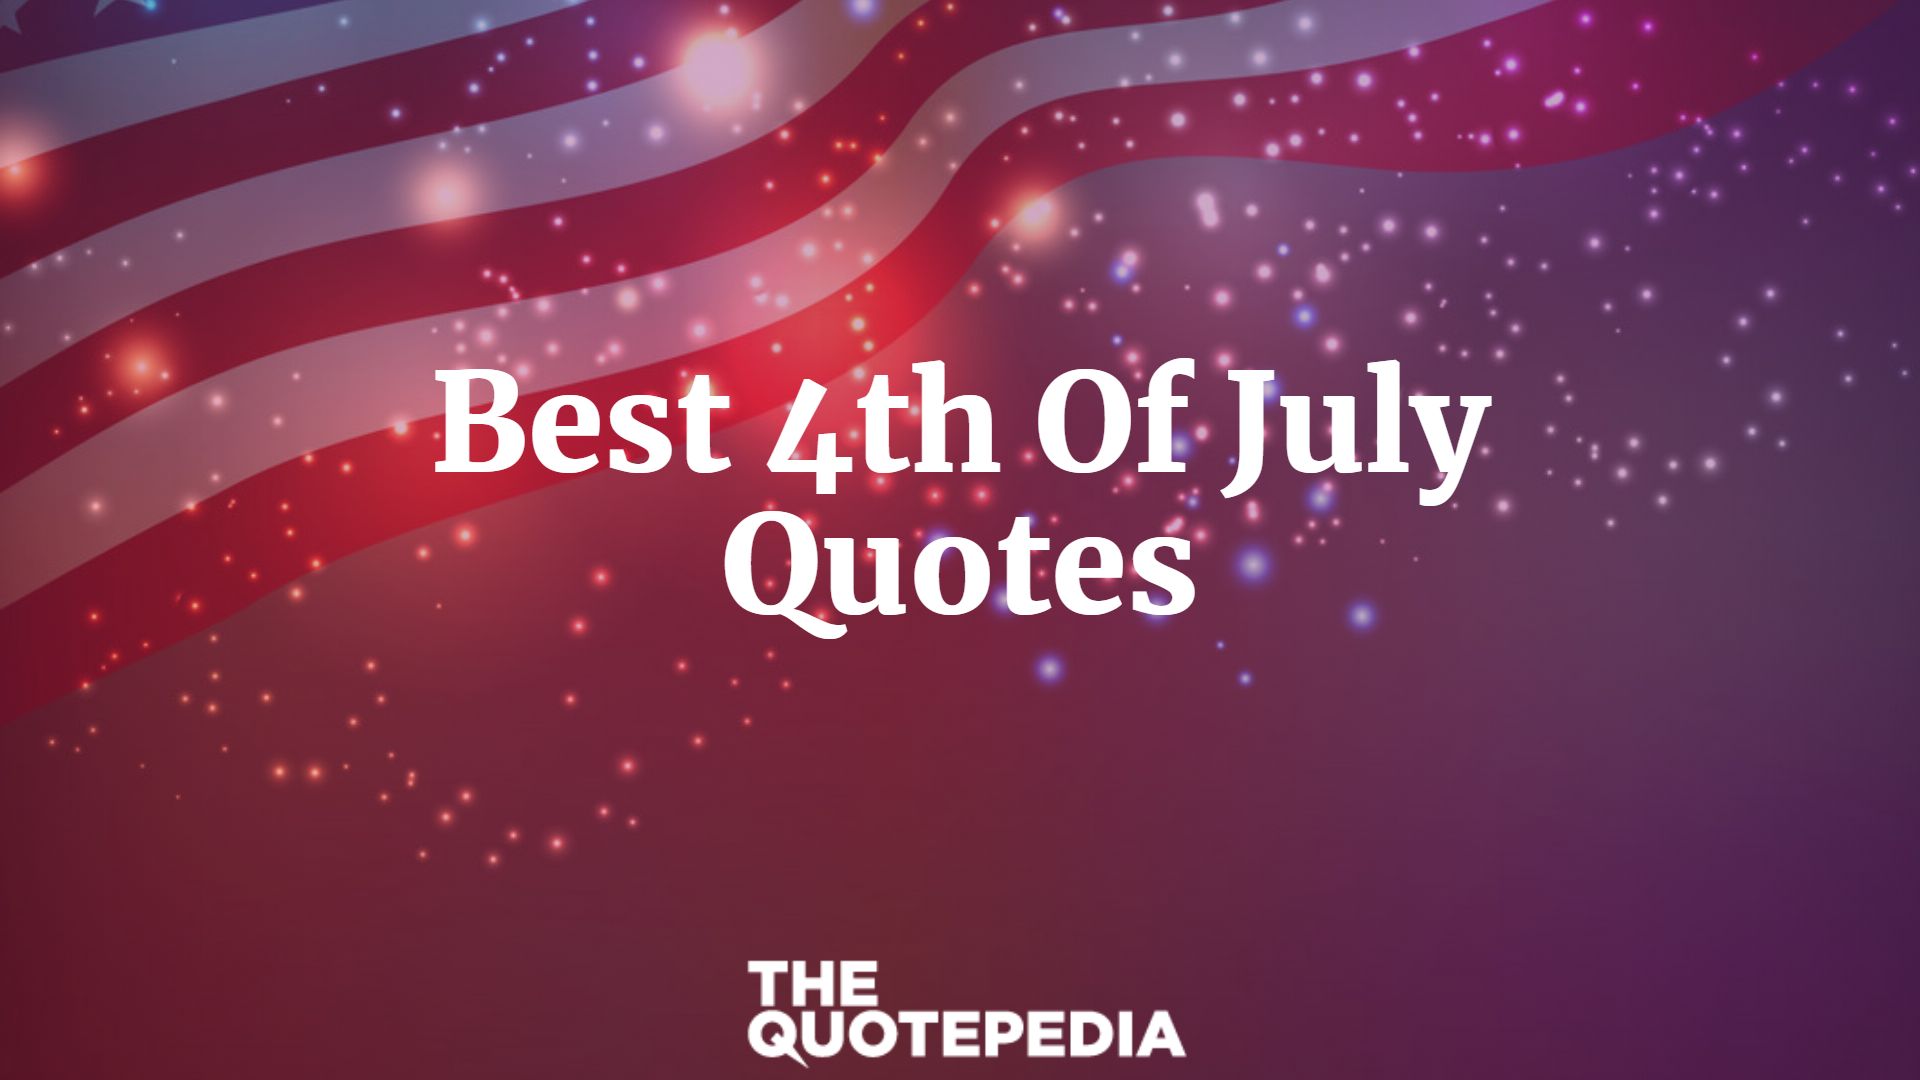 65+ Best 4th Of July Quotes Which Will Make You Feel Patriotism The